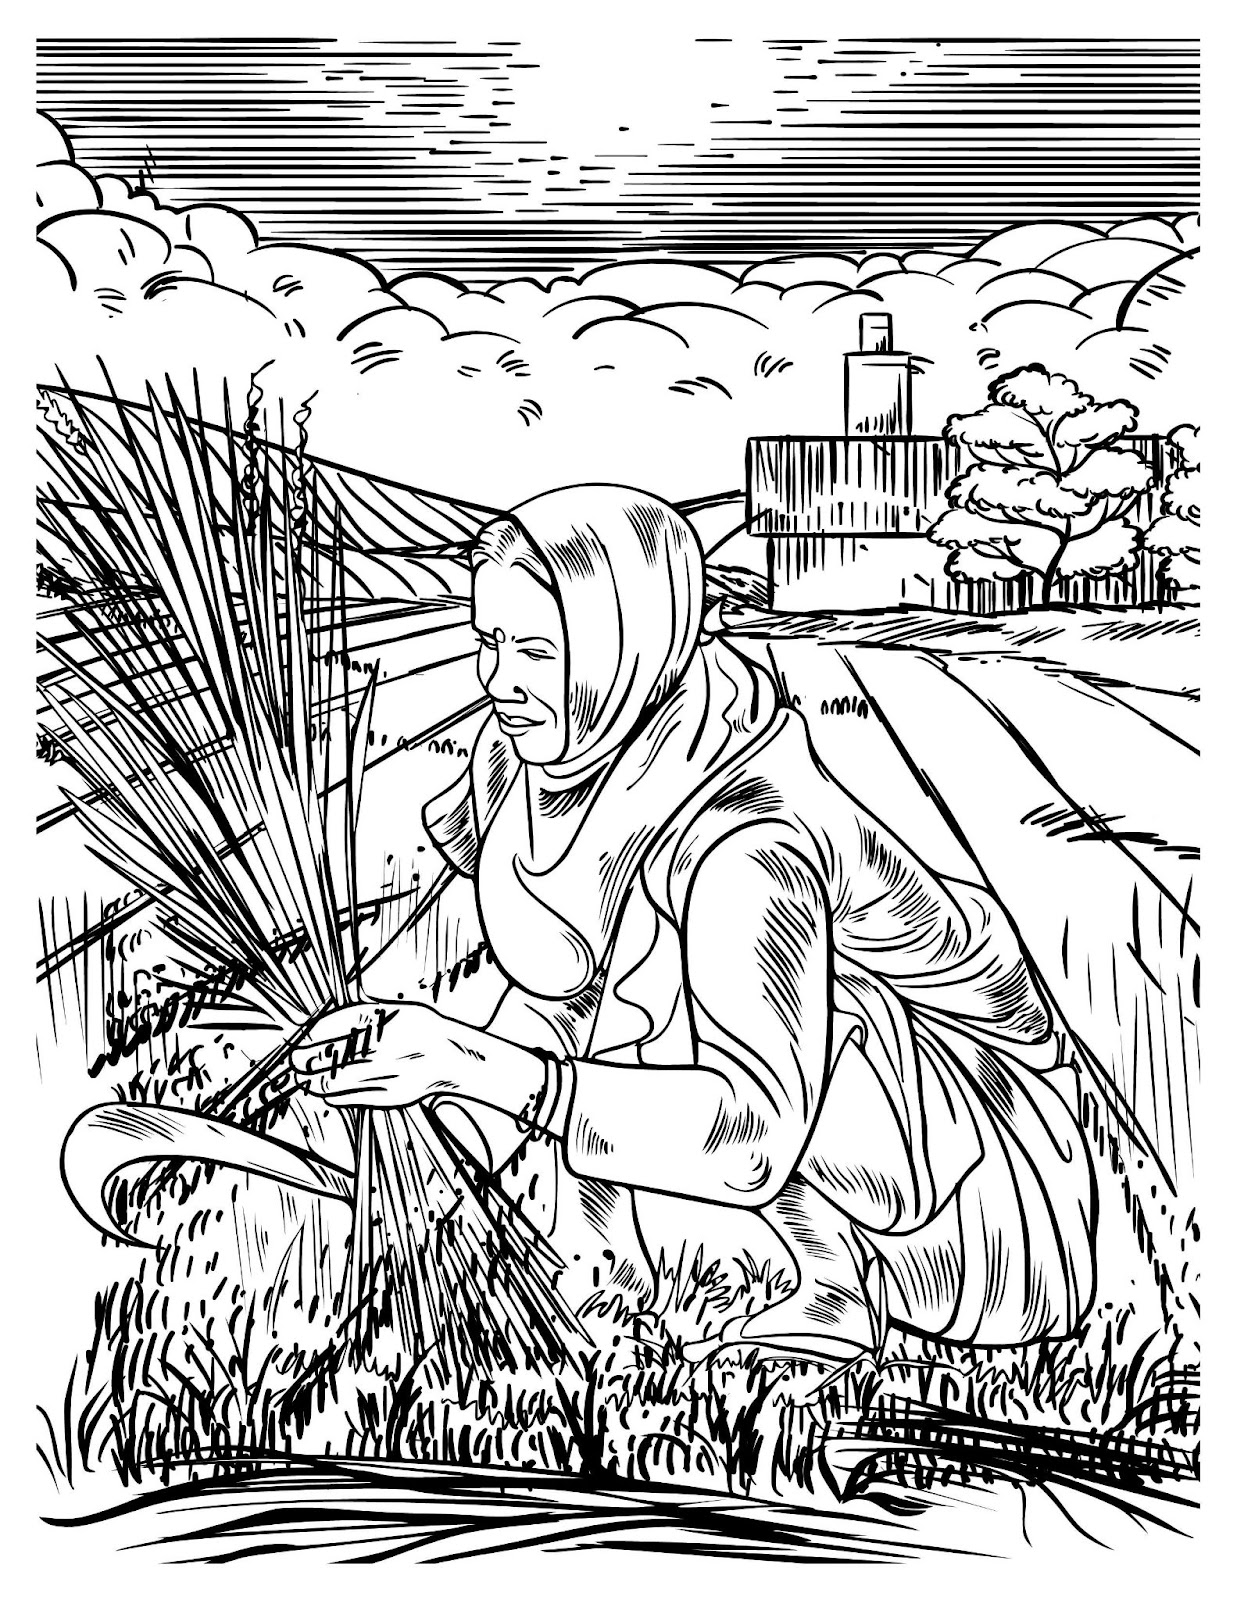 Hardworking Farmer Coloring Pages21